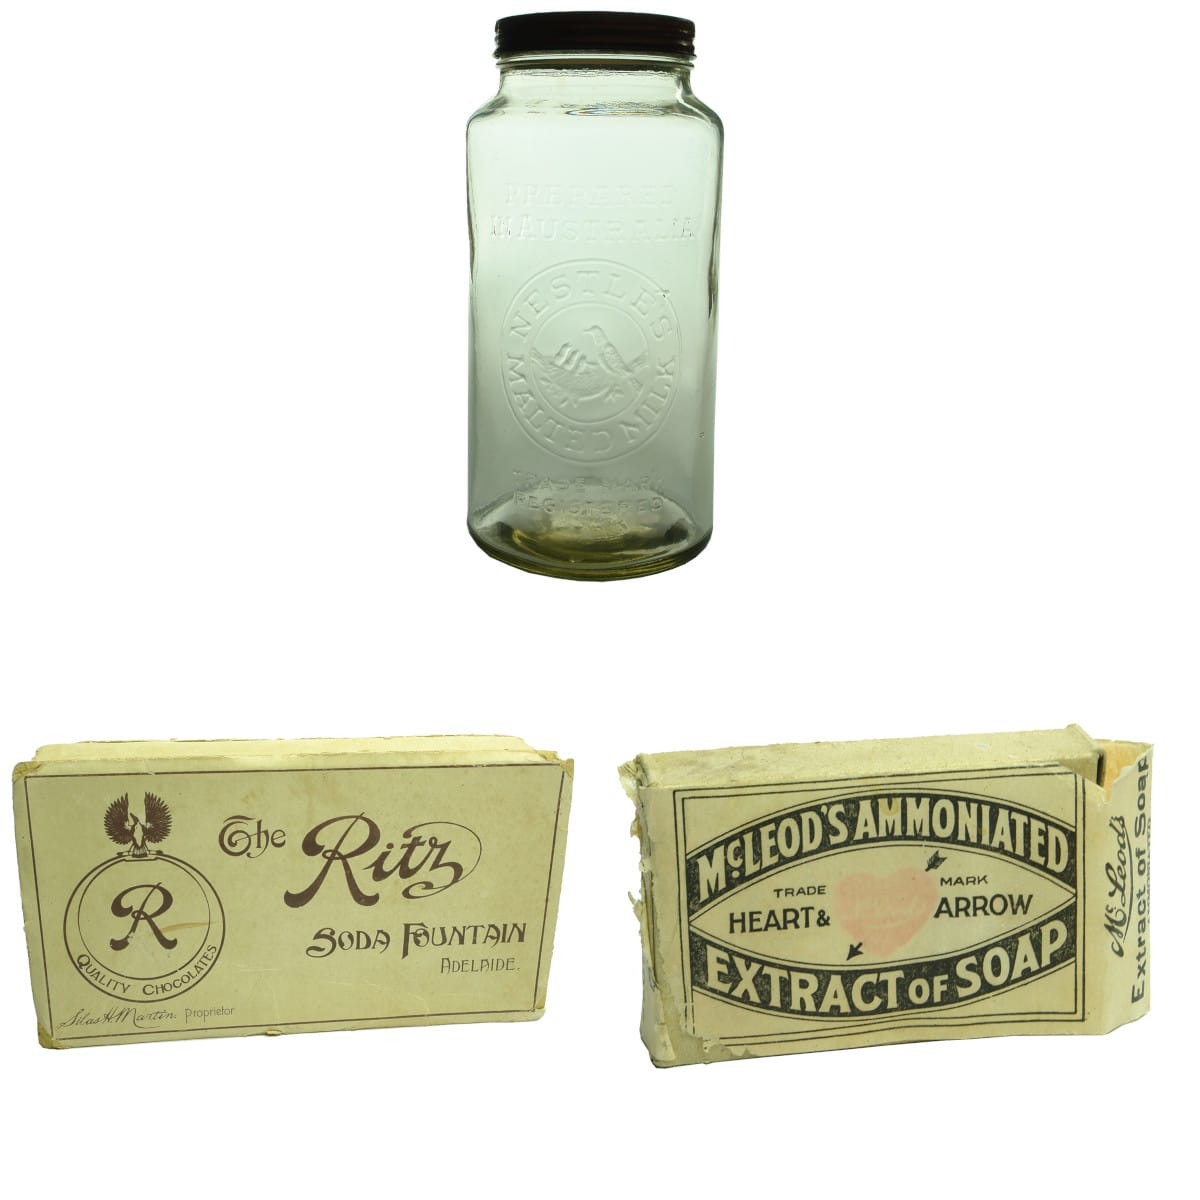 3 items. Large Nestles Jar and 2 lots of packaging: Ritz Soda Fountain Adelaide and McLeod's Ammoniated Soap.